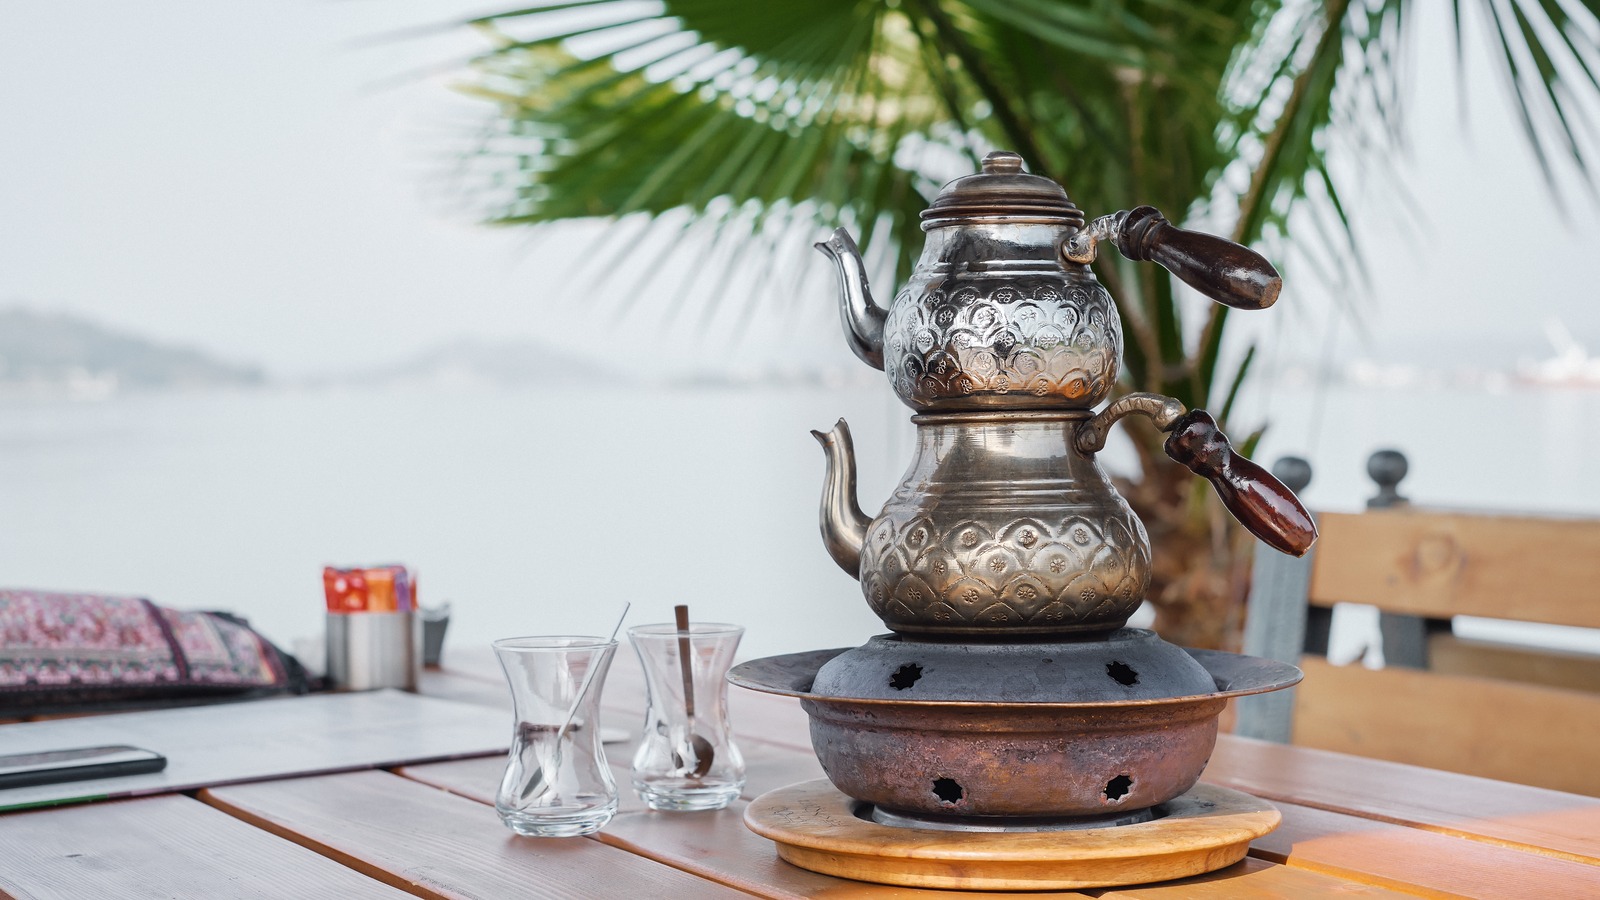 https://www.tastingtable.com/img/gallery/why-the-turkish-double-kettle-is-a-game-changer-for-tea-lovers/l-intro-1680794775.jpg